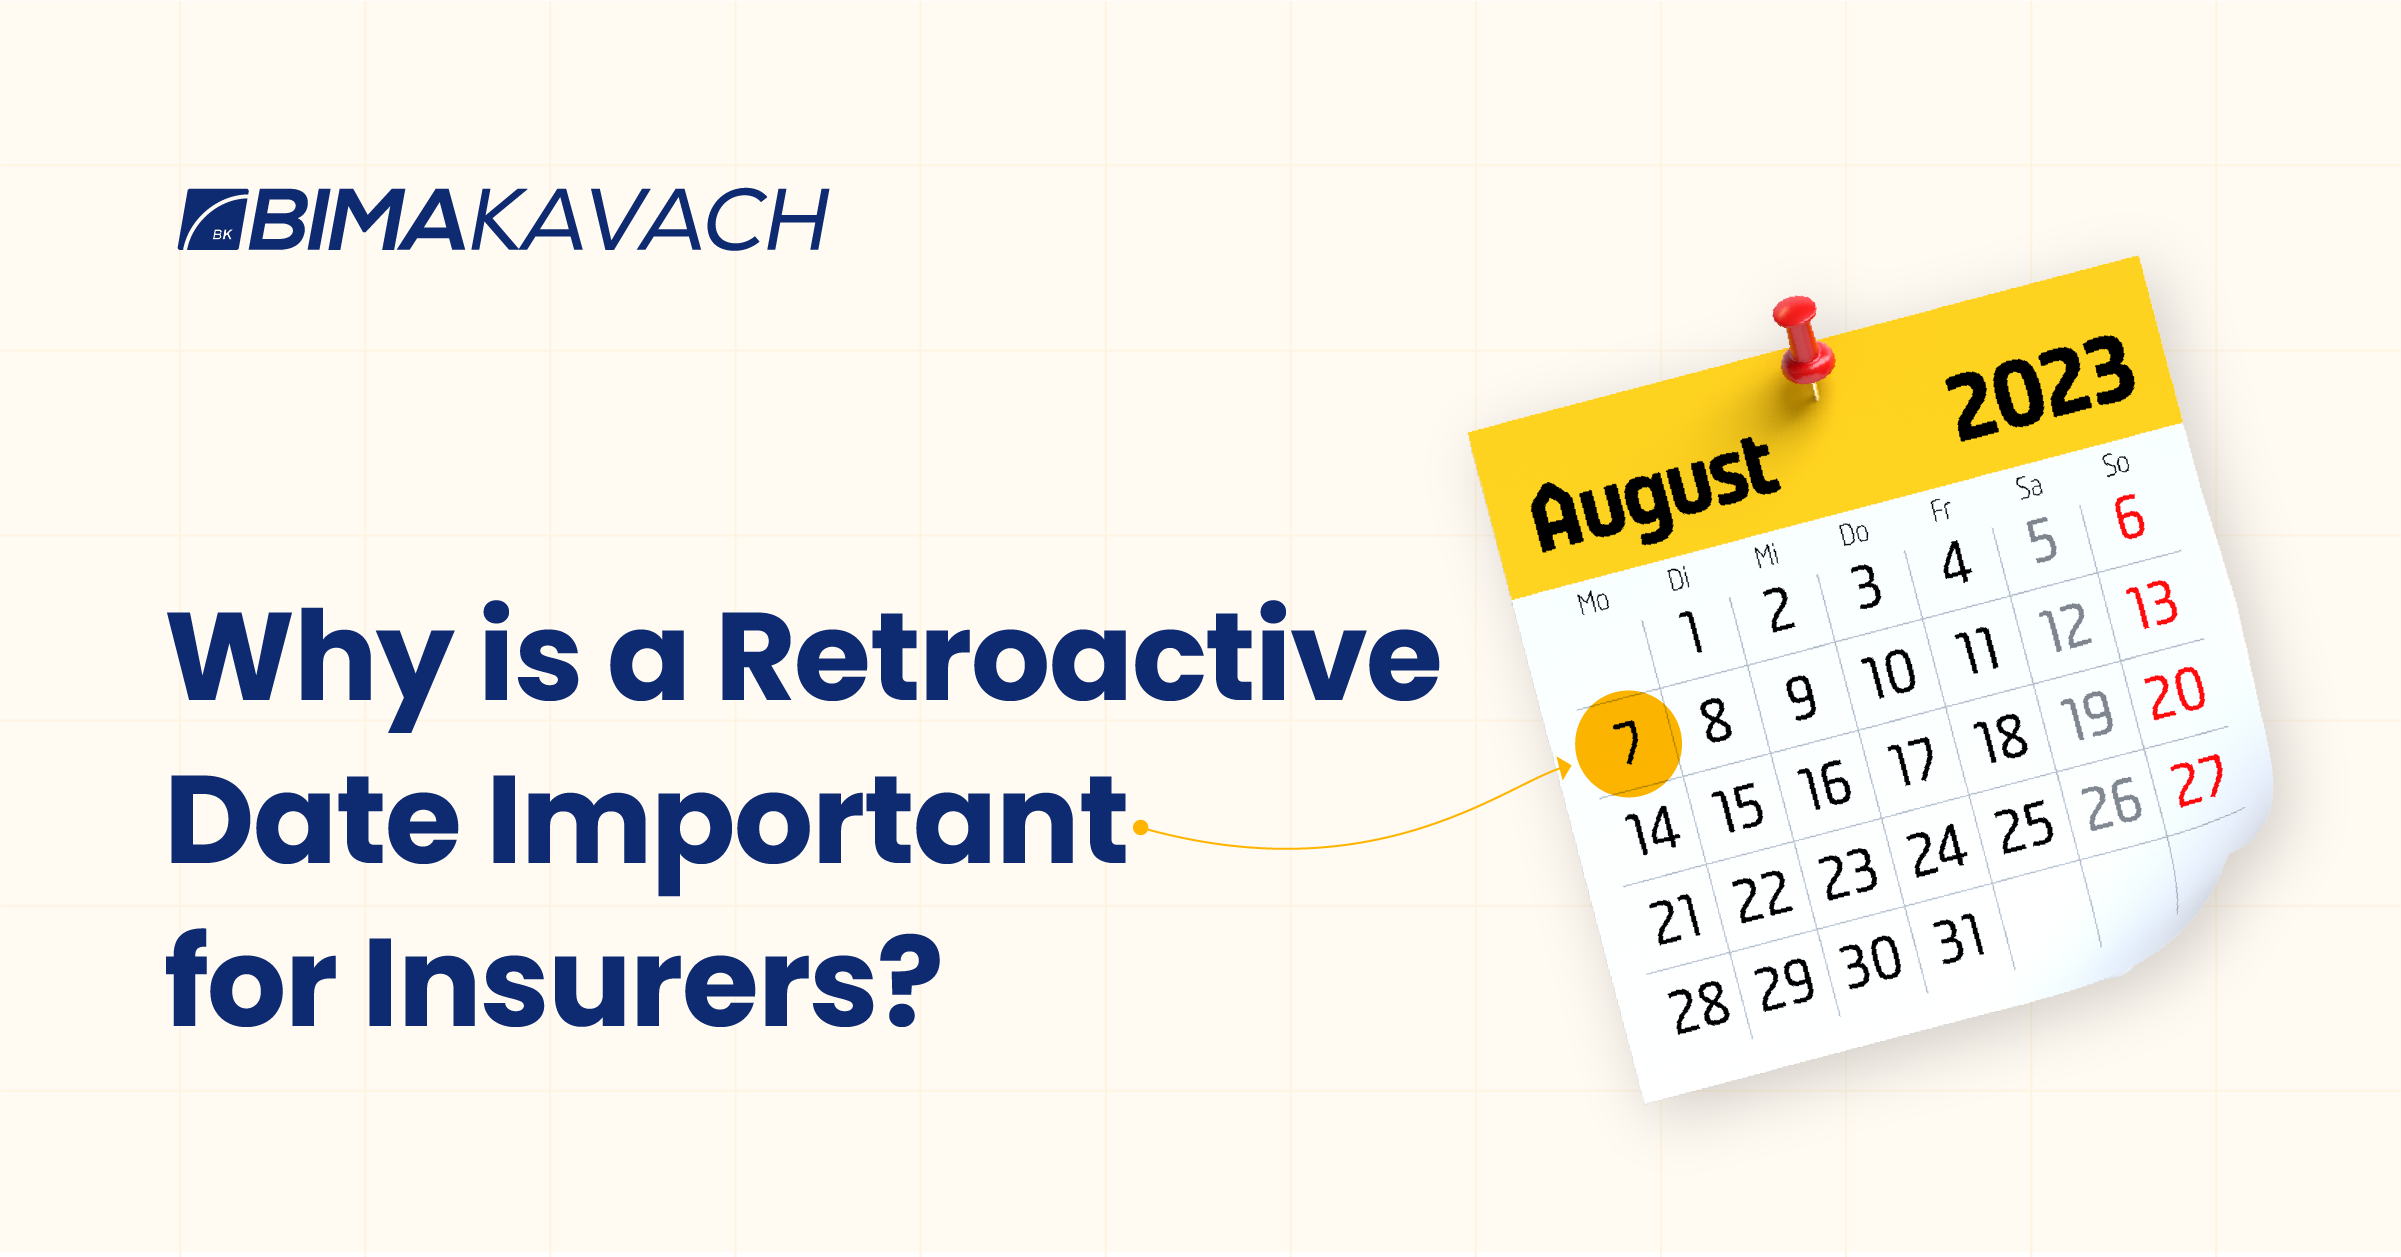 Why is a Retroactive Date Important for Insurers